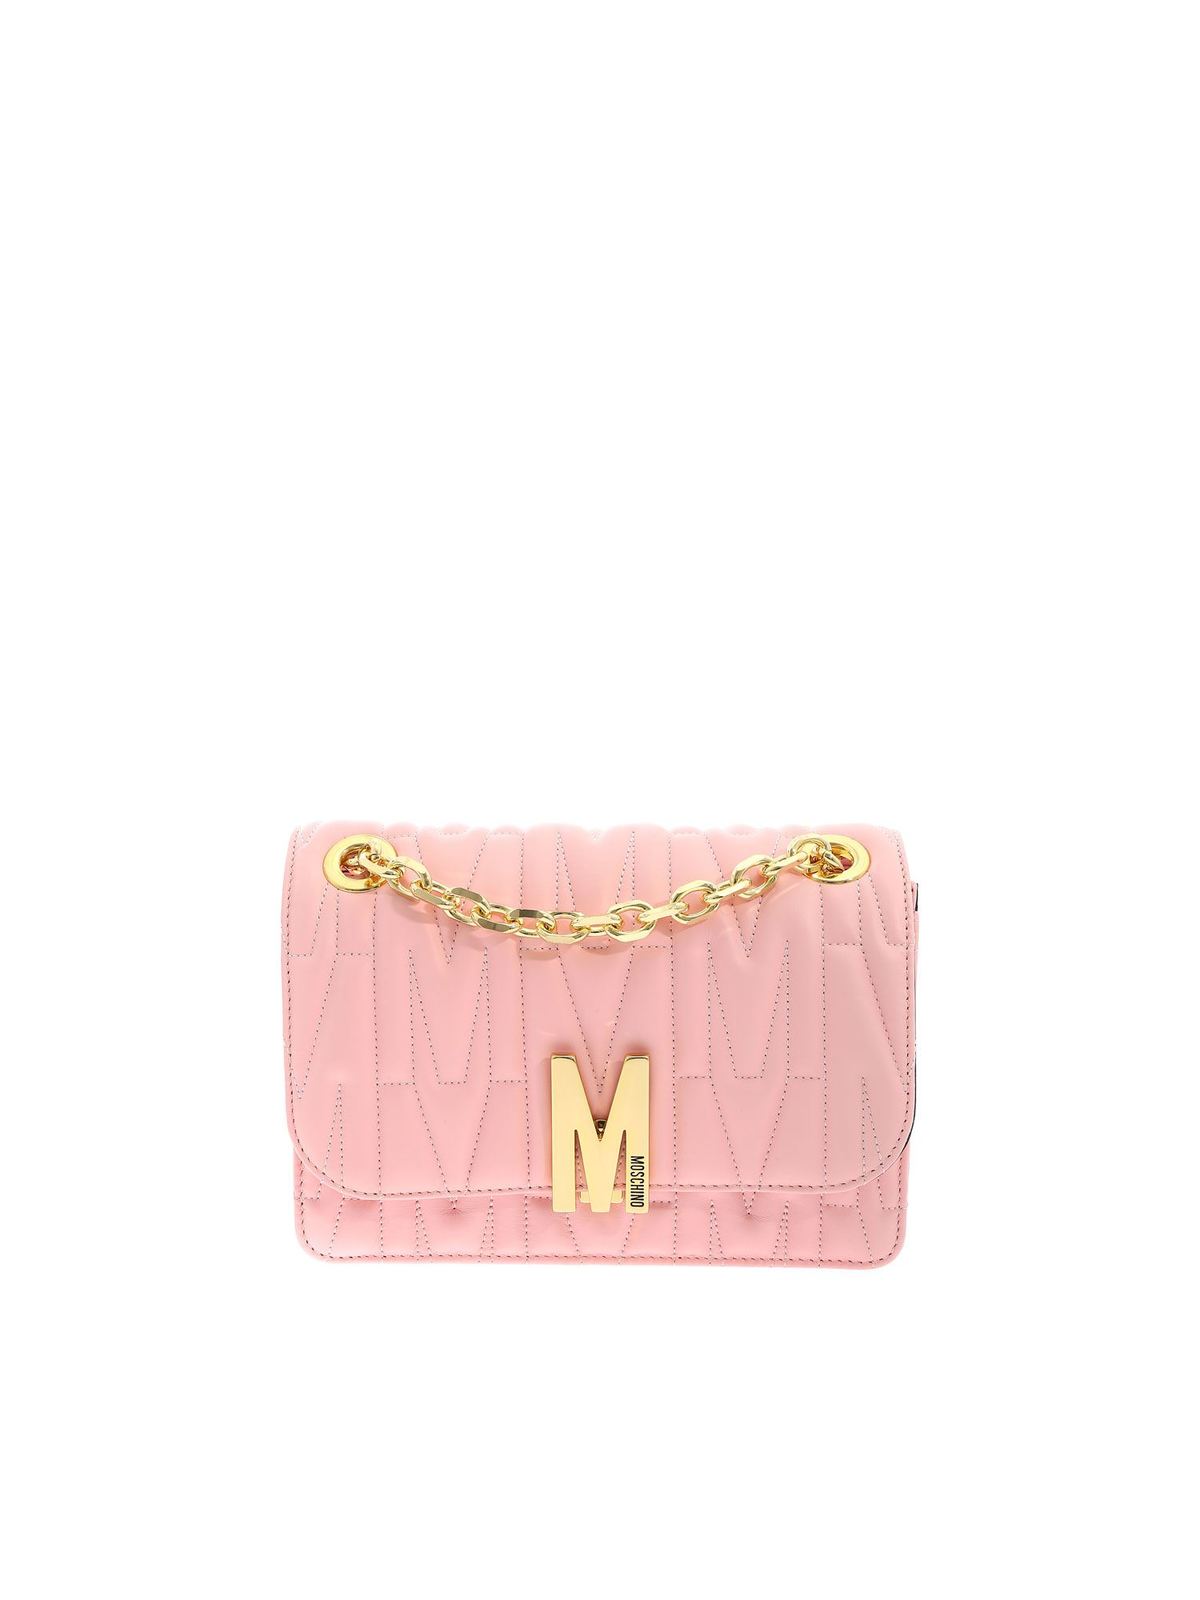 MOSCHINO M QUILTED PINK LEATHER SHOULDER BAG